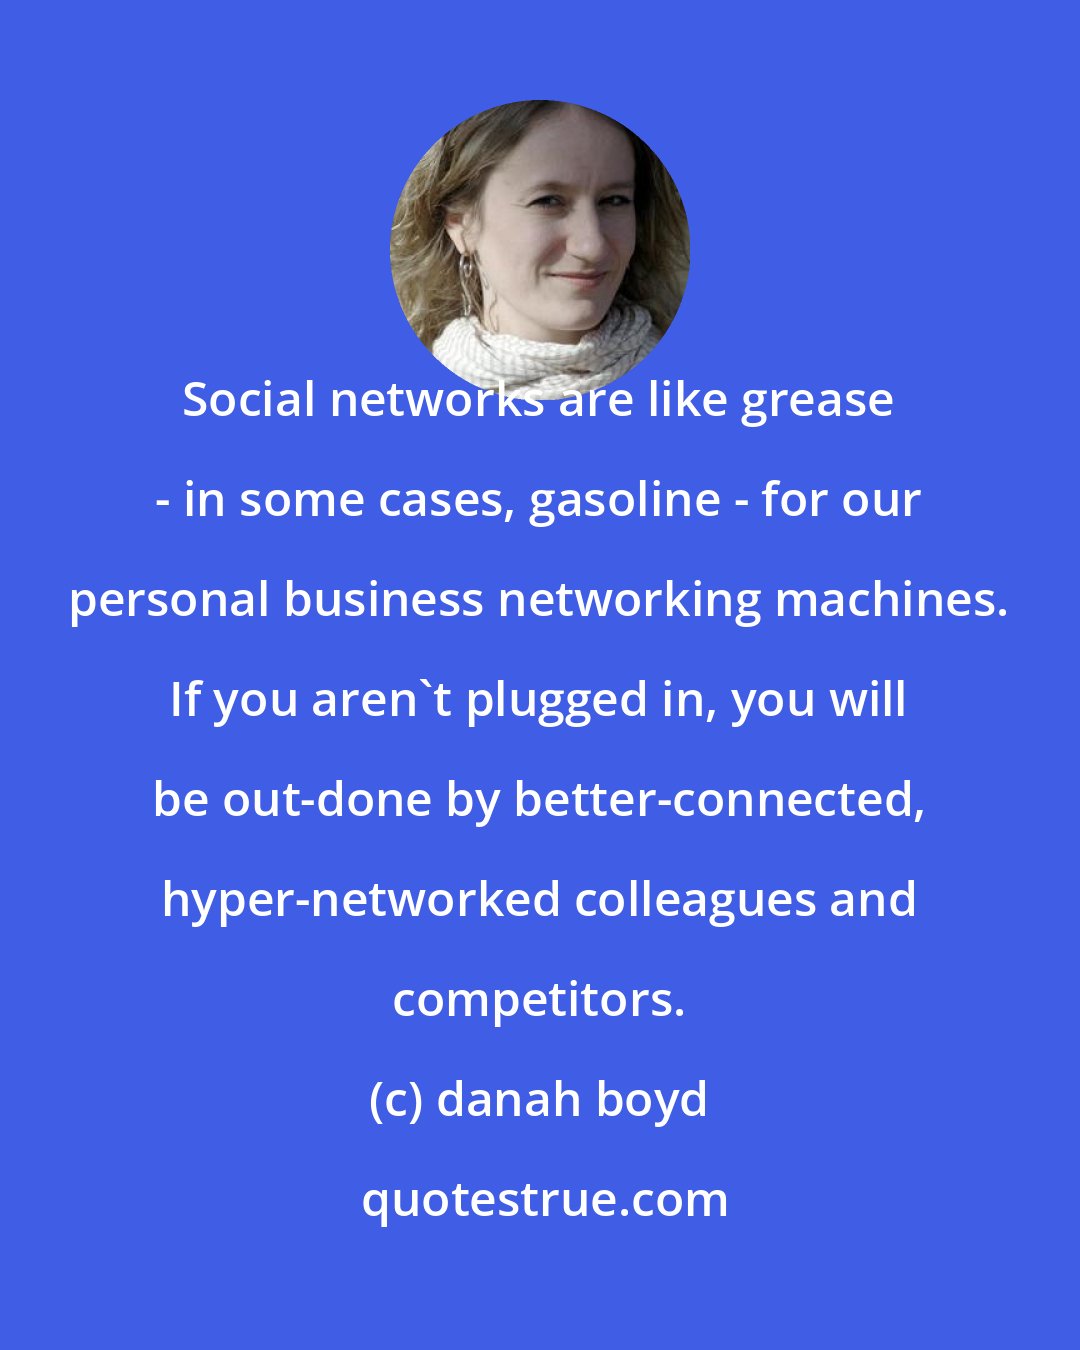 danah boyd: Social networks are like grease - in some cases, gasoline - for our personal business networking machines. If you aren't plugged in, you will be out-done by better-connected, hyper-networked colleagues and competitors.